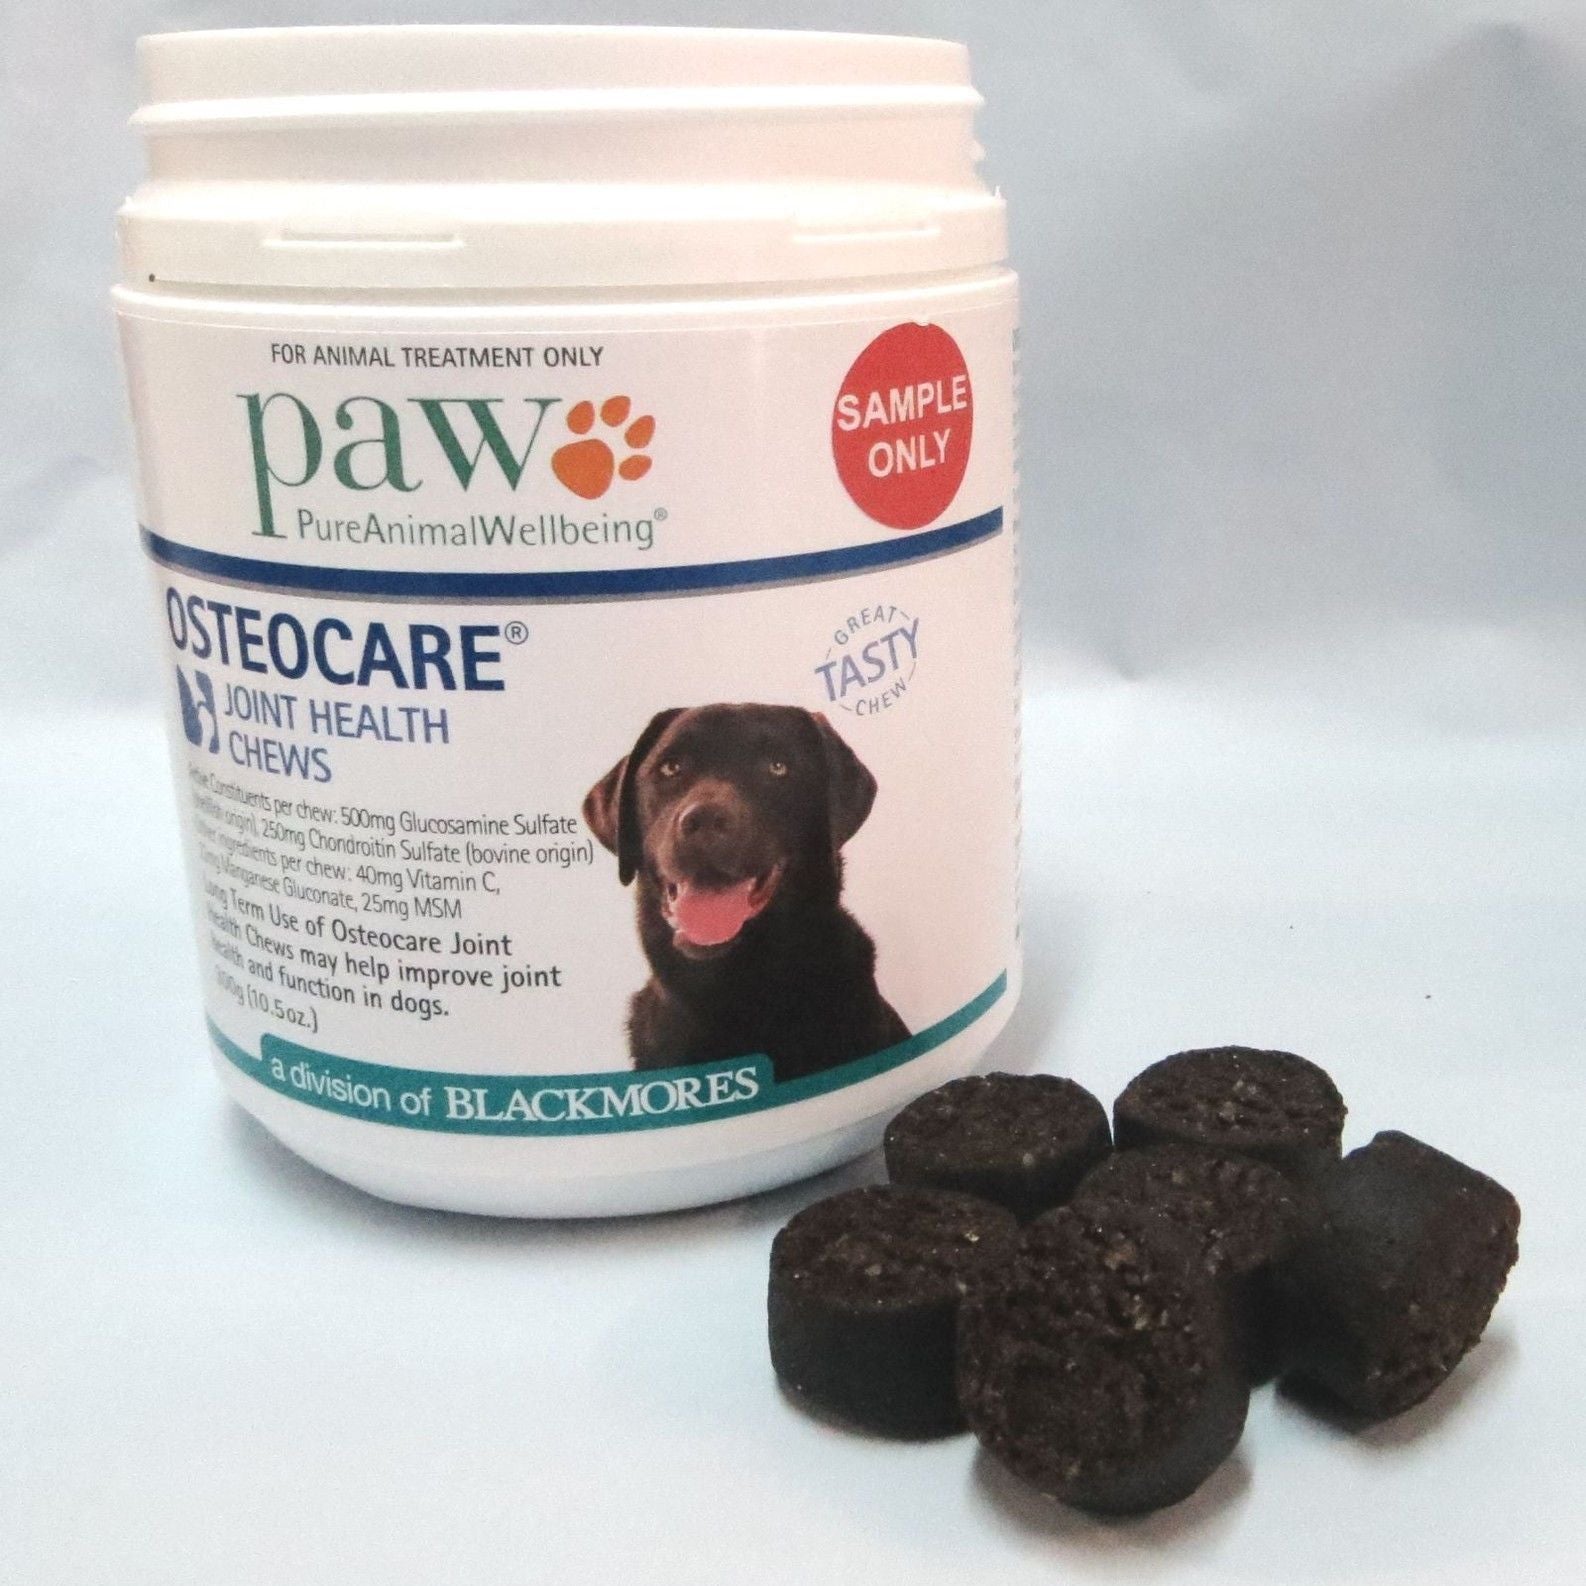 PAW BY BLACKMORES - Osteocare Joint Health Chews 300g (60 Chews)